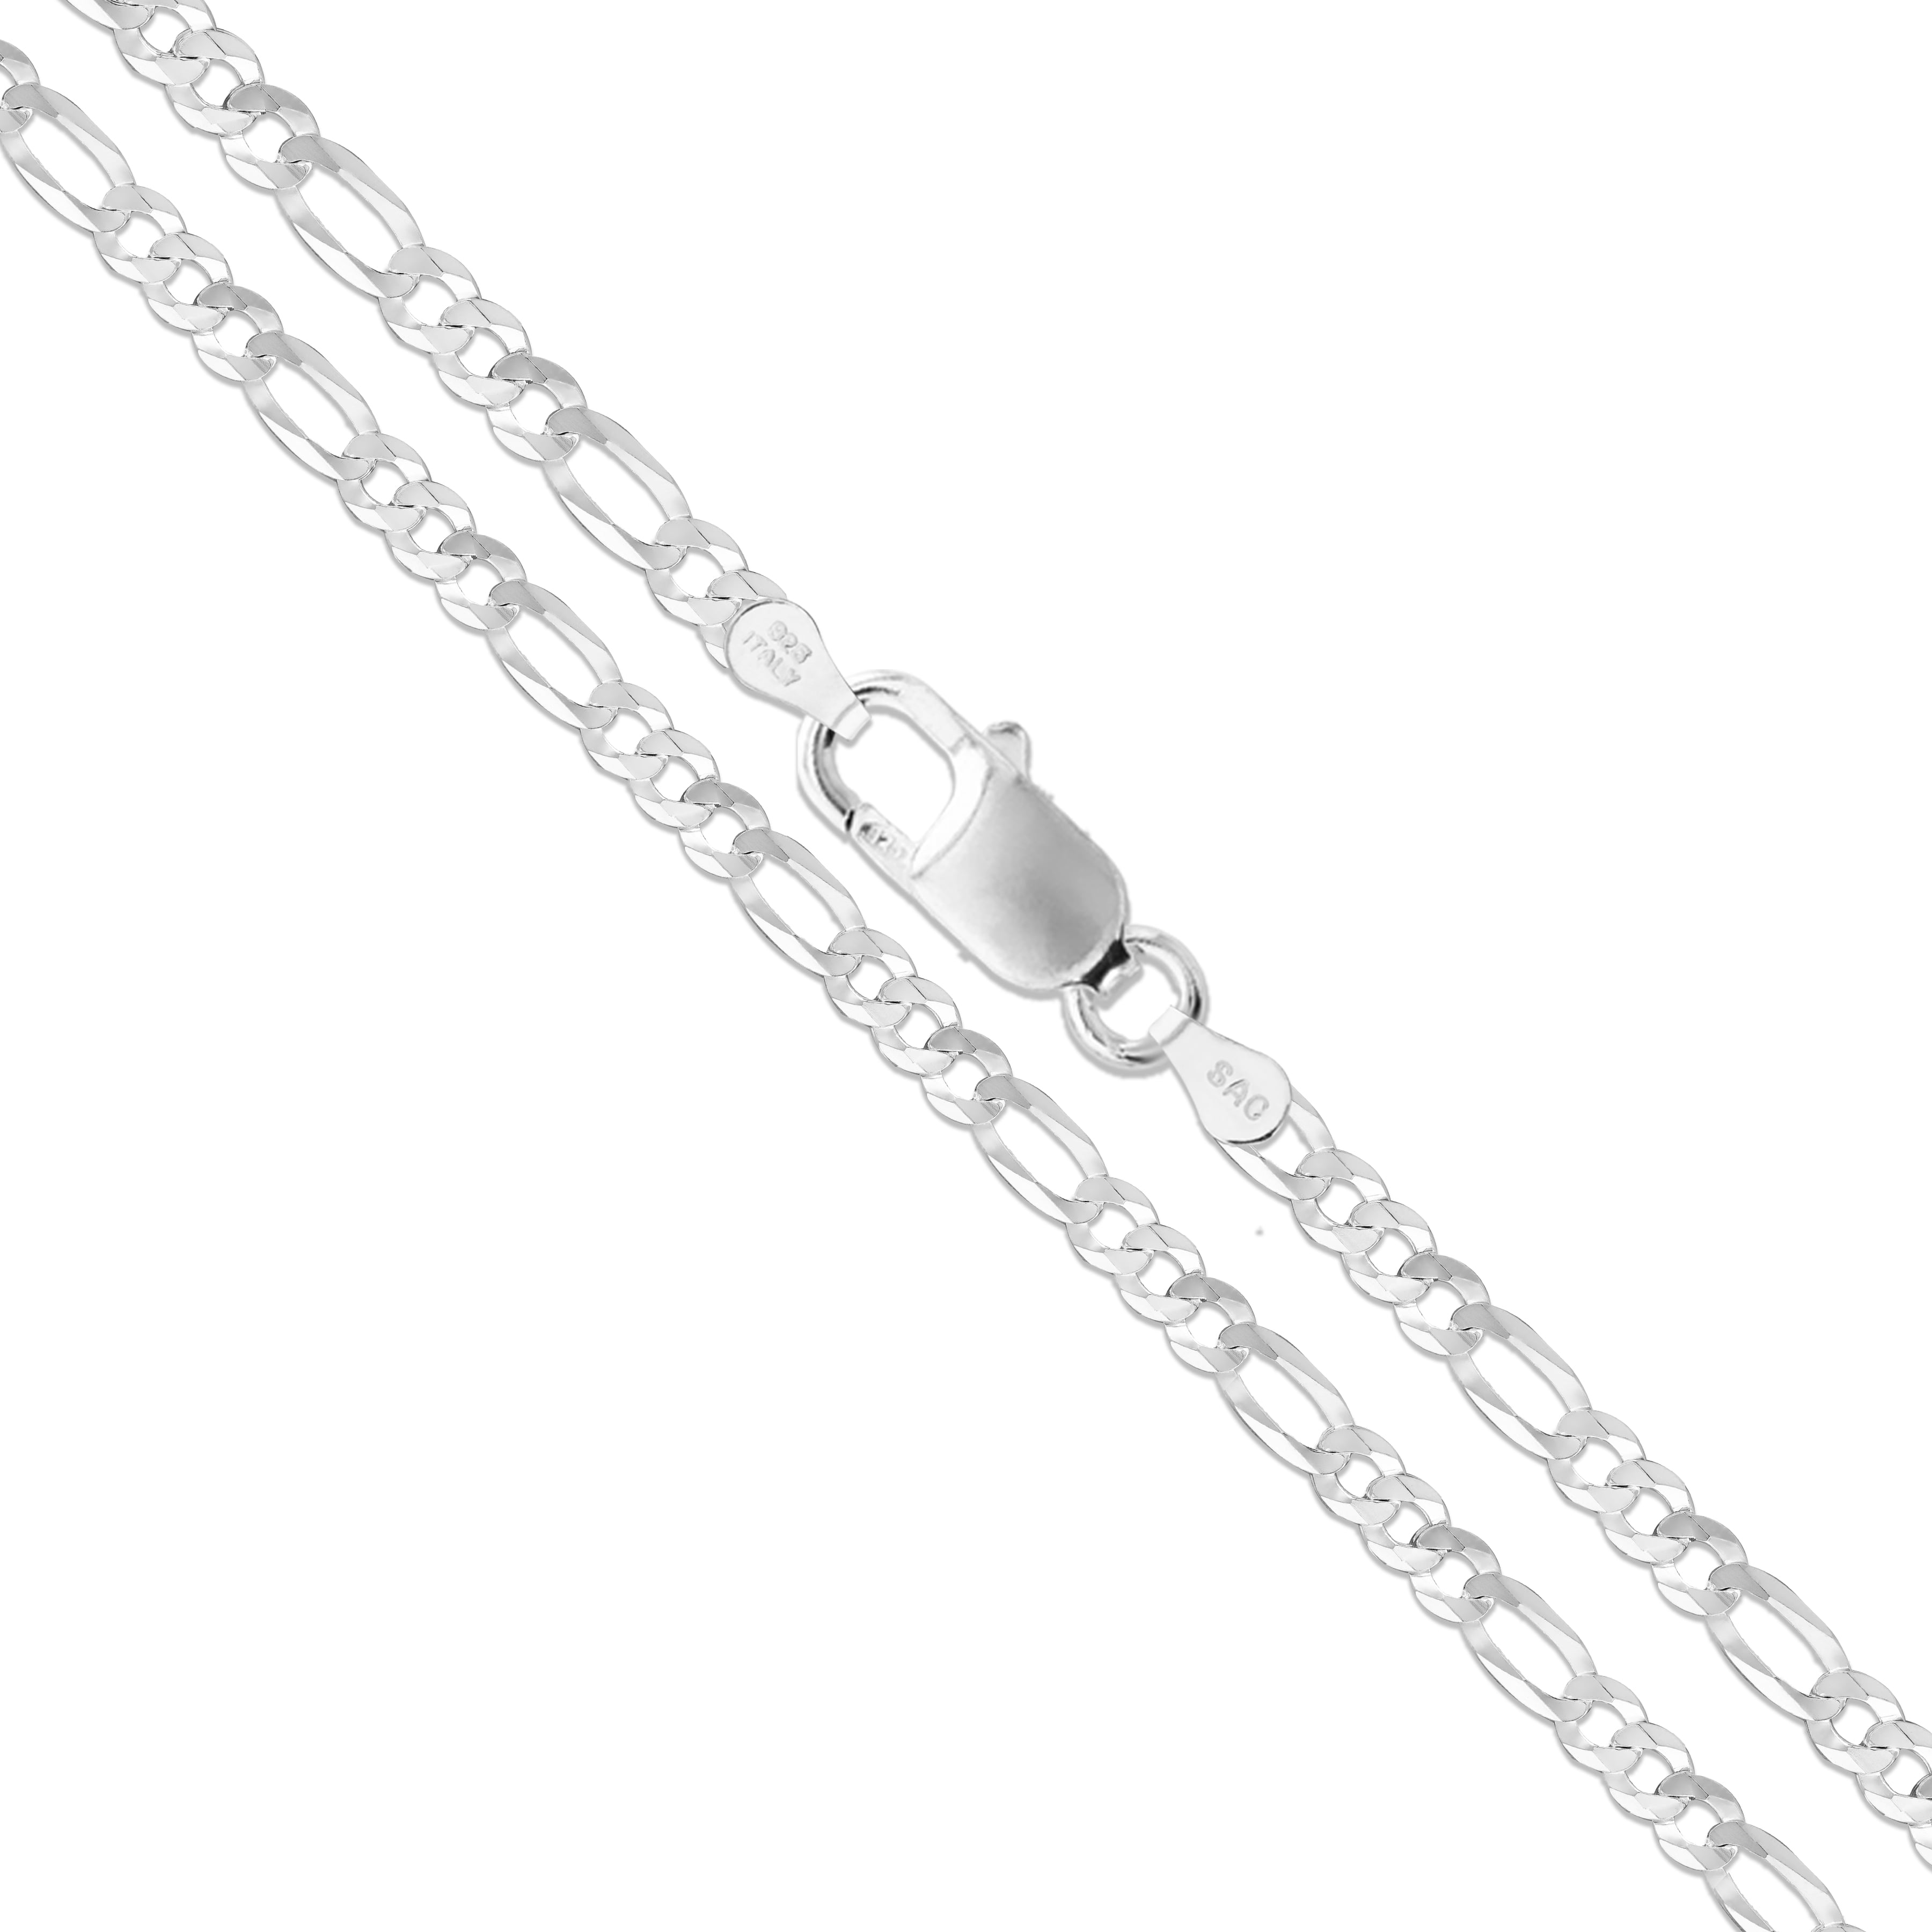 MEN'S WOMEN'S REAL STERLING SILVER CLASSIC FIGARO LINK NECKLACE CHAIN 22-24 INCH 